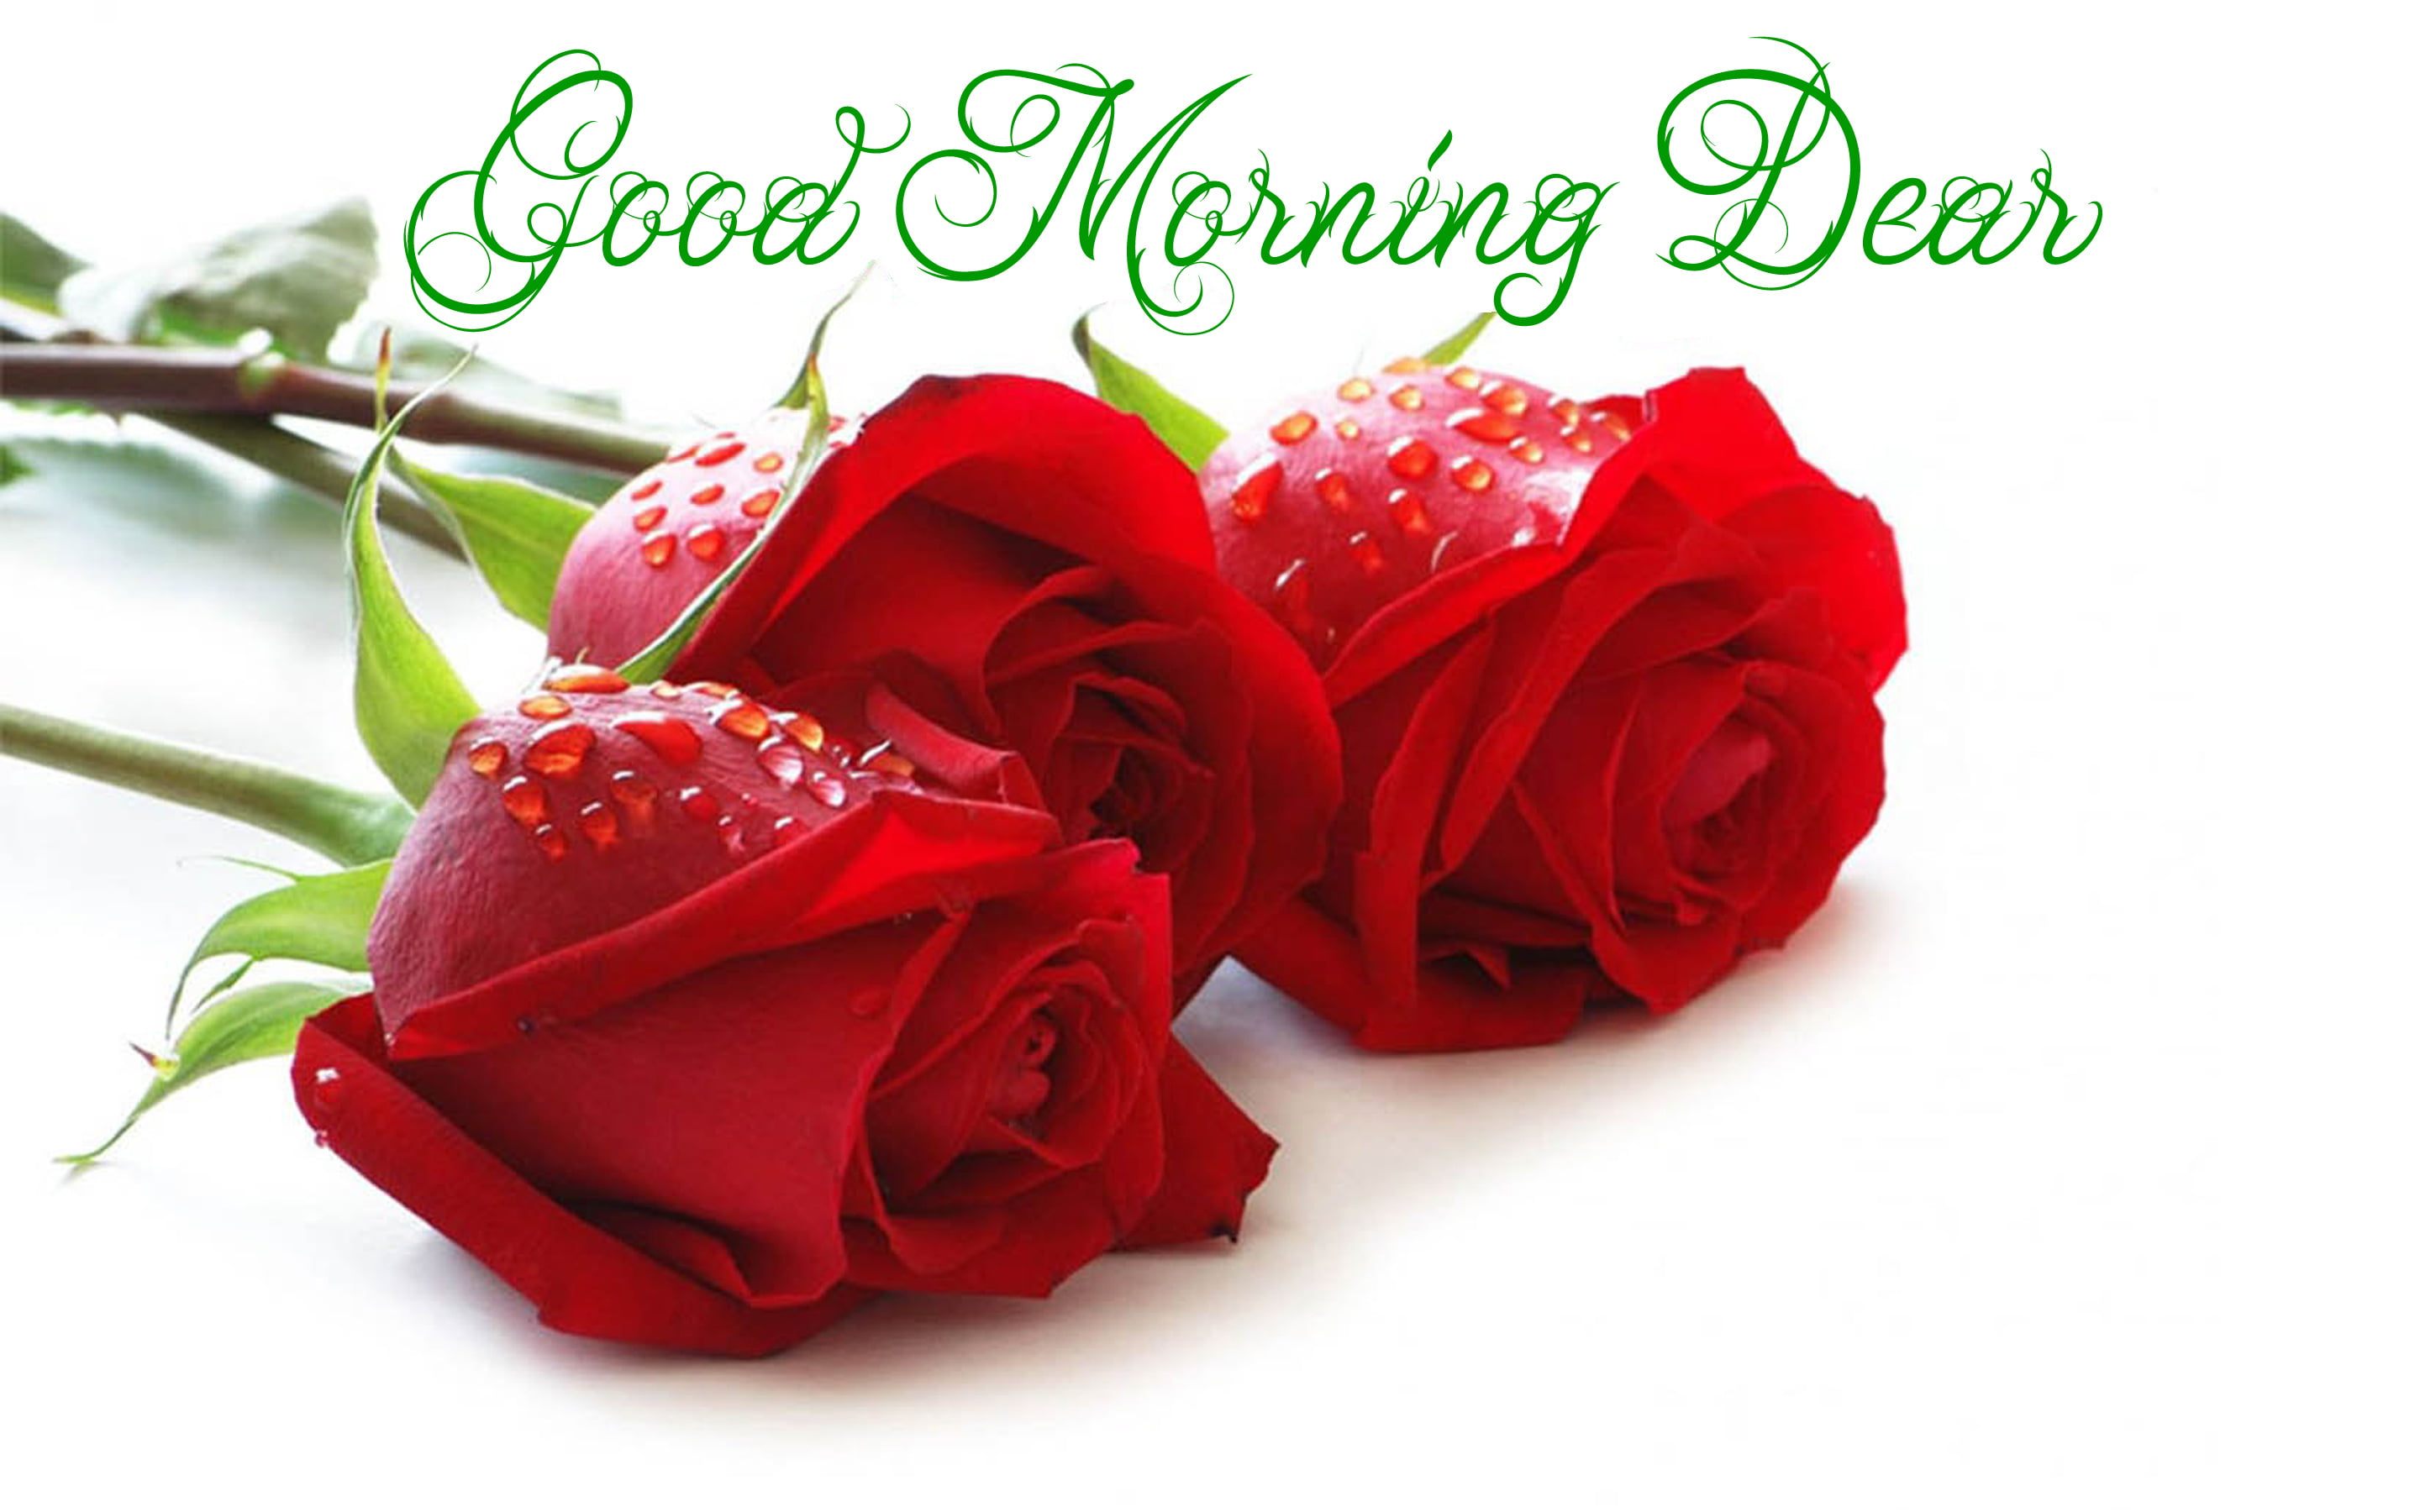 Good Morning Dear Red Roses With Water Droplets, flower, white background